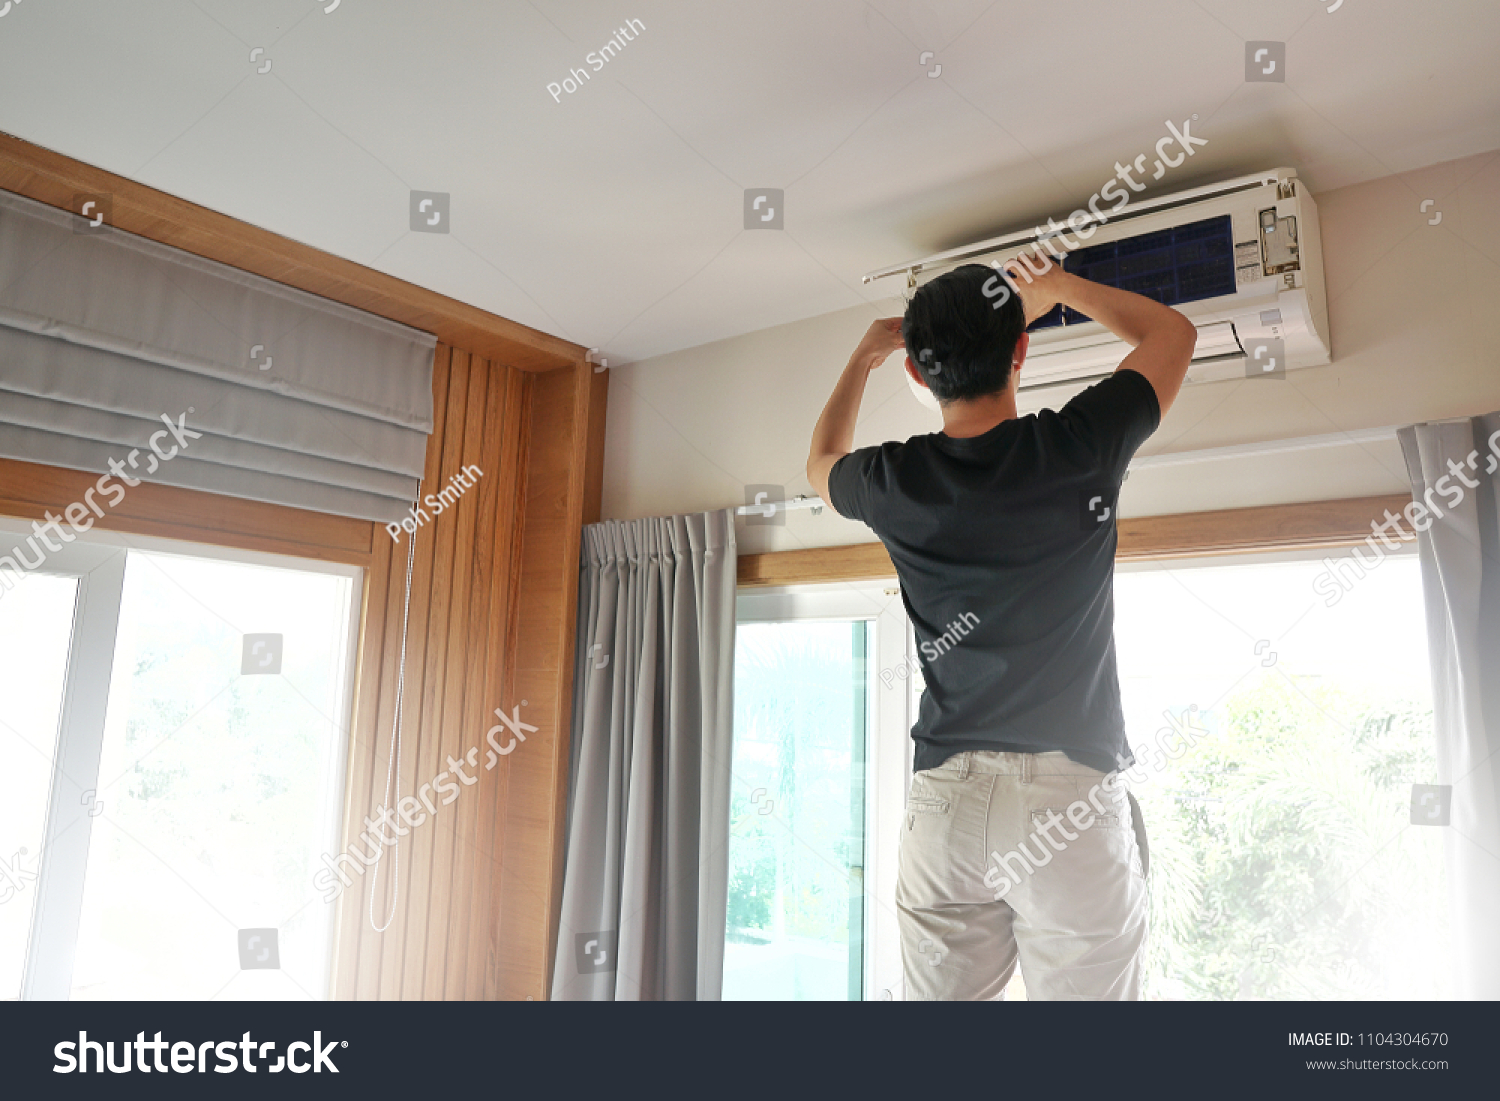 Technician man repairing ,cleaning and maintenance Air conditioner on the wall in bedroom.On site home service,Business ,Industrial concept. #1104304670